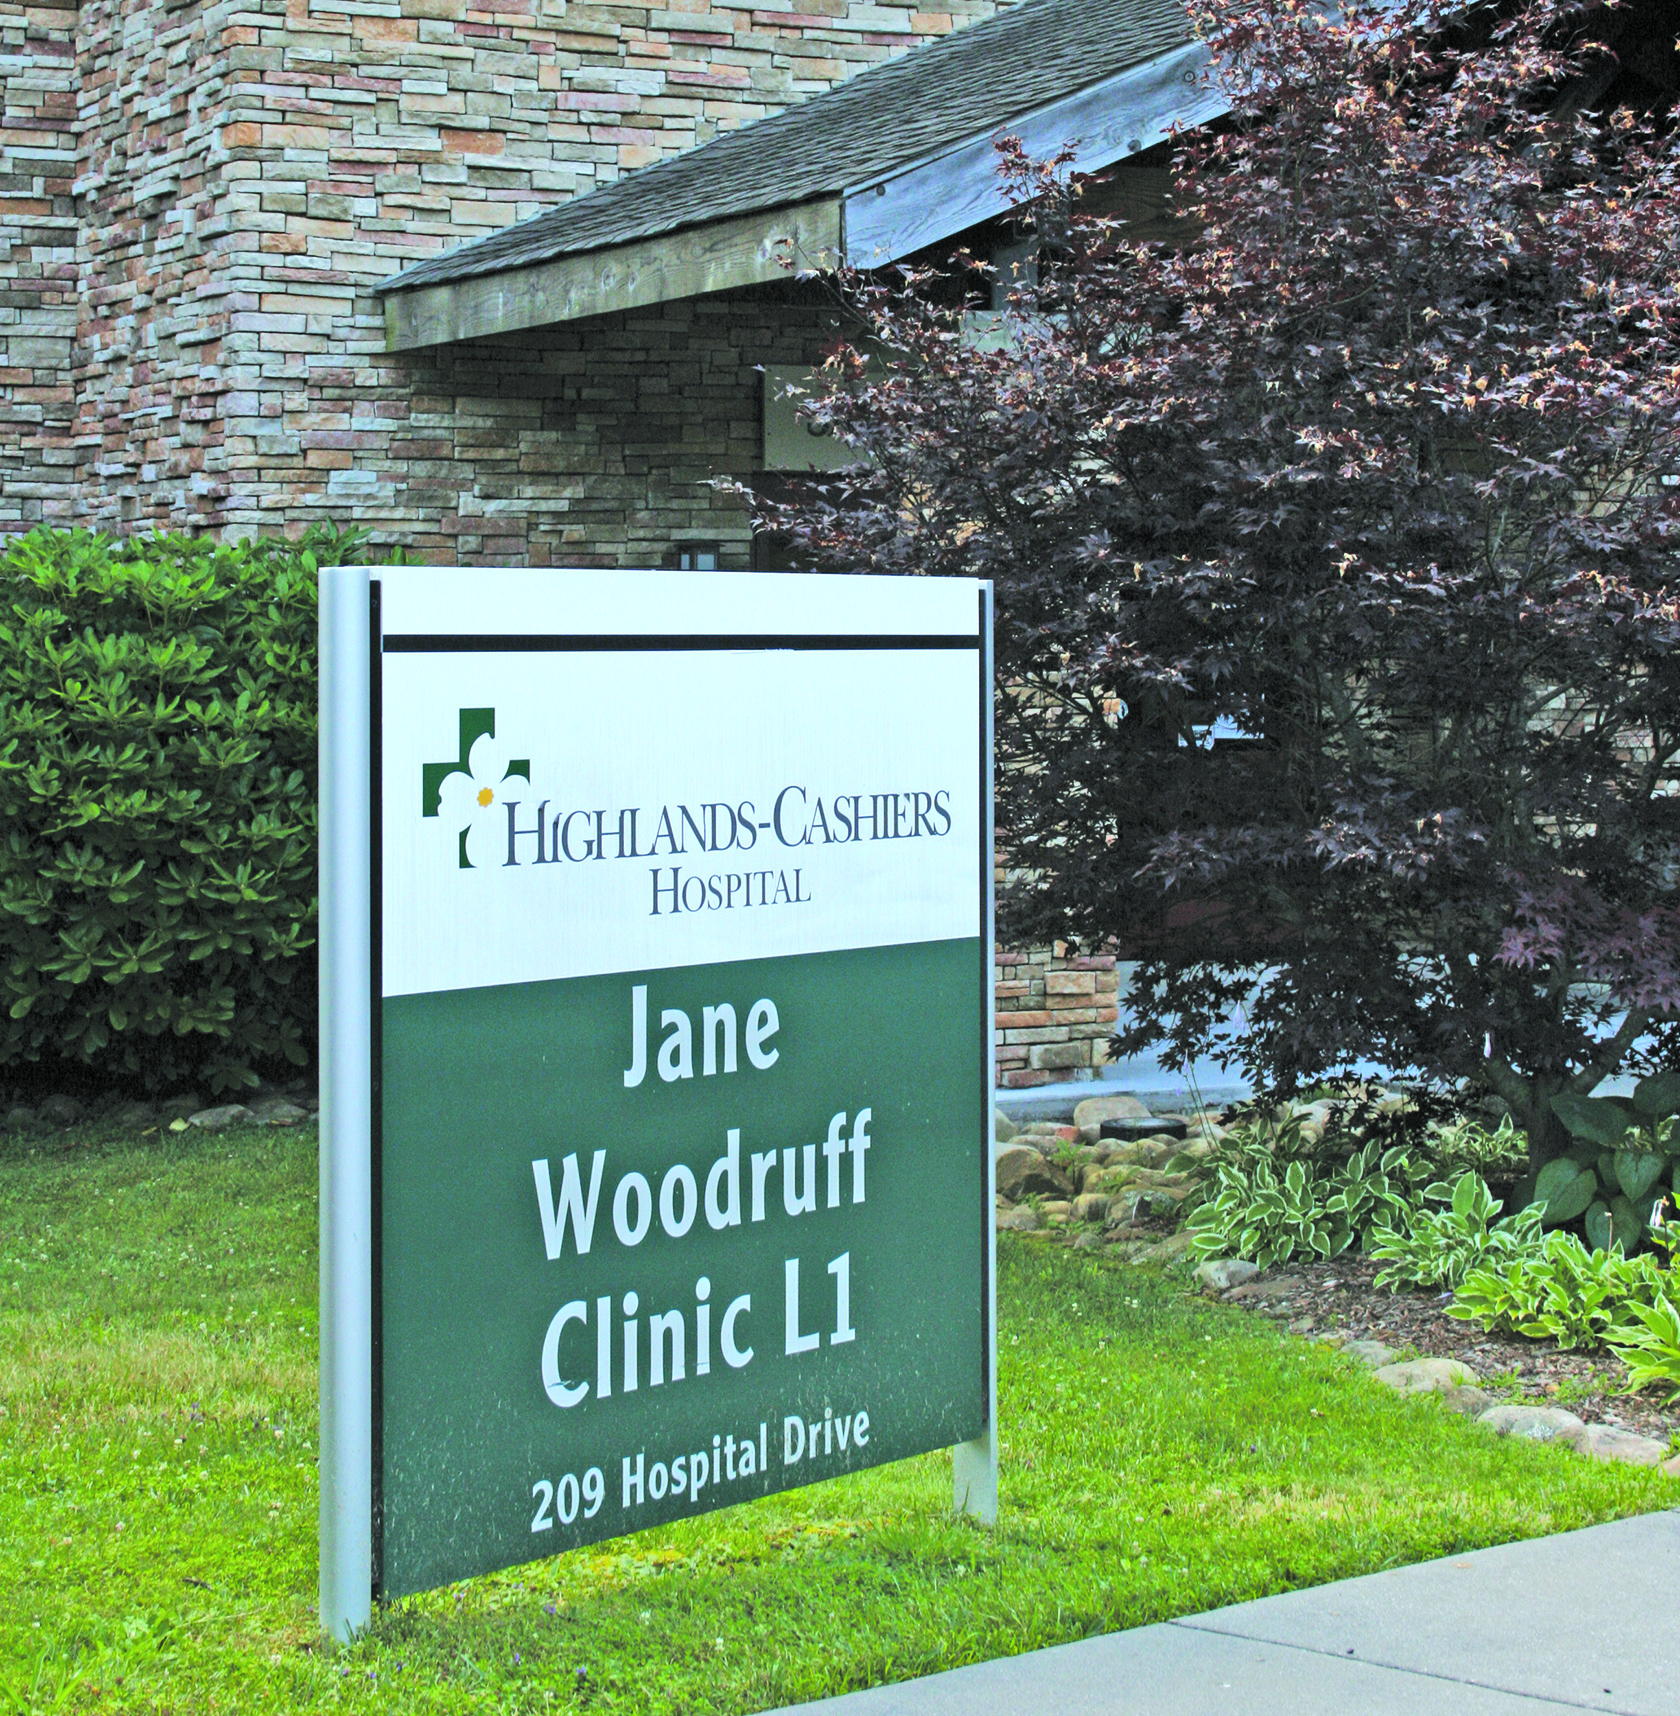 The Jane Woodruff Building will soon be home to a new health clinic according to HCH officials.